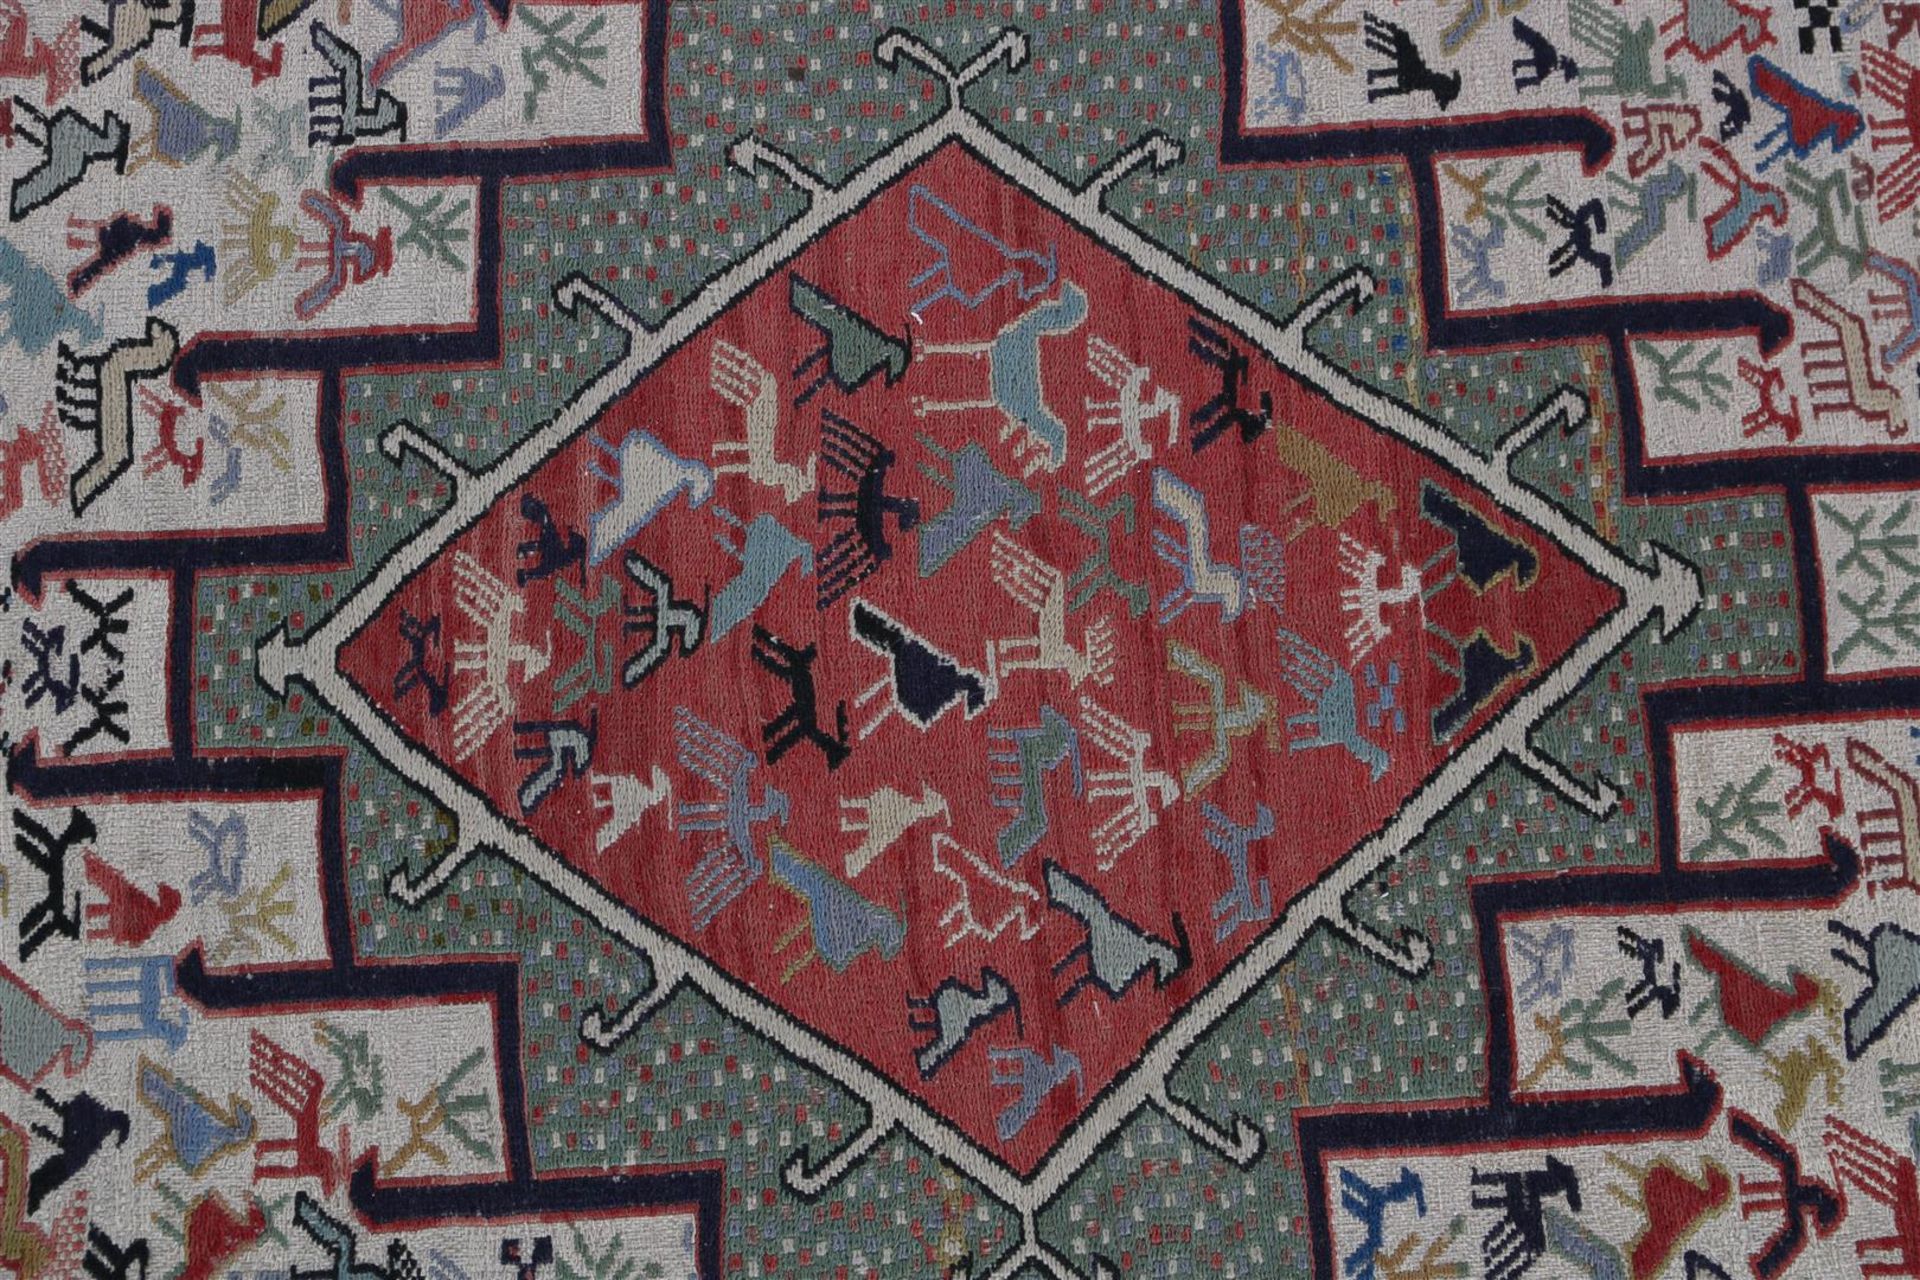 Hand-knotted kilim carpet - Image 2 of 4